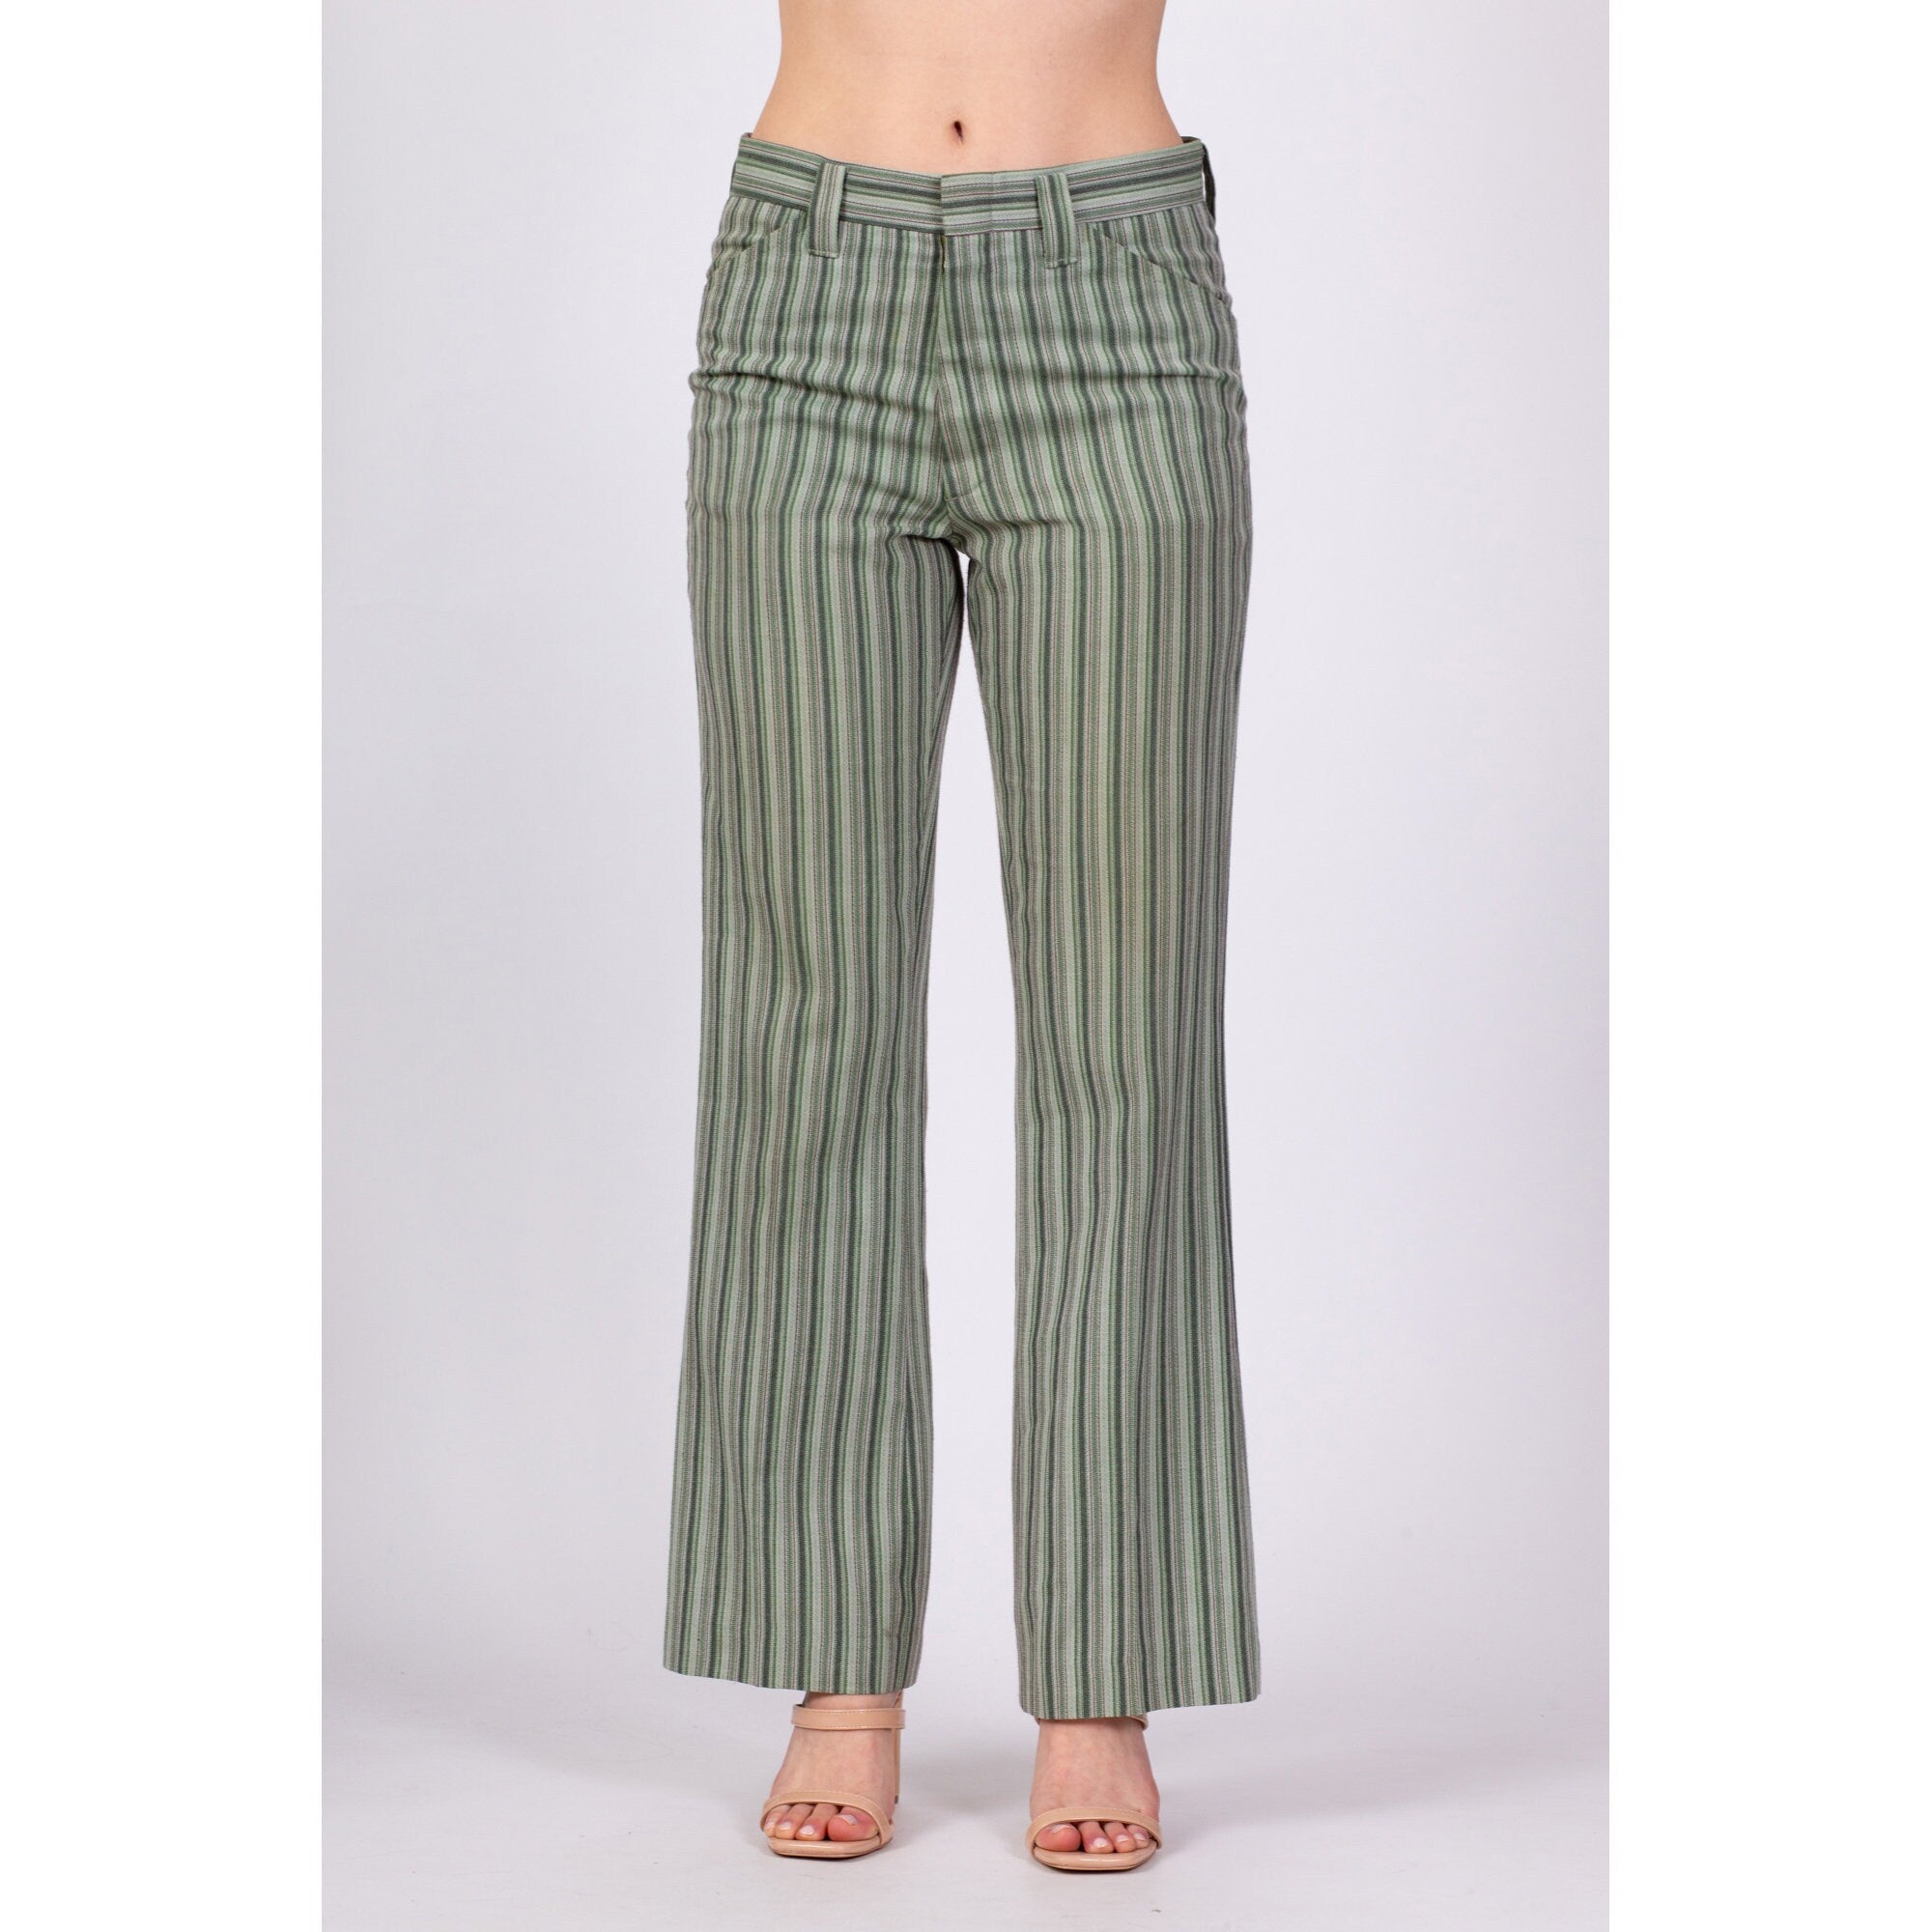 70s Green Striped Mid Rise Unisex Trousers - 32